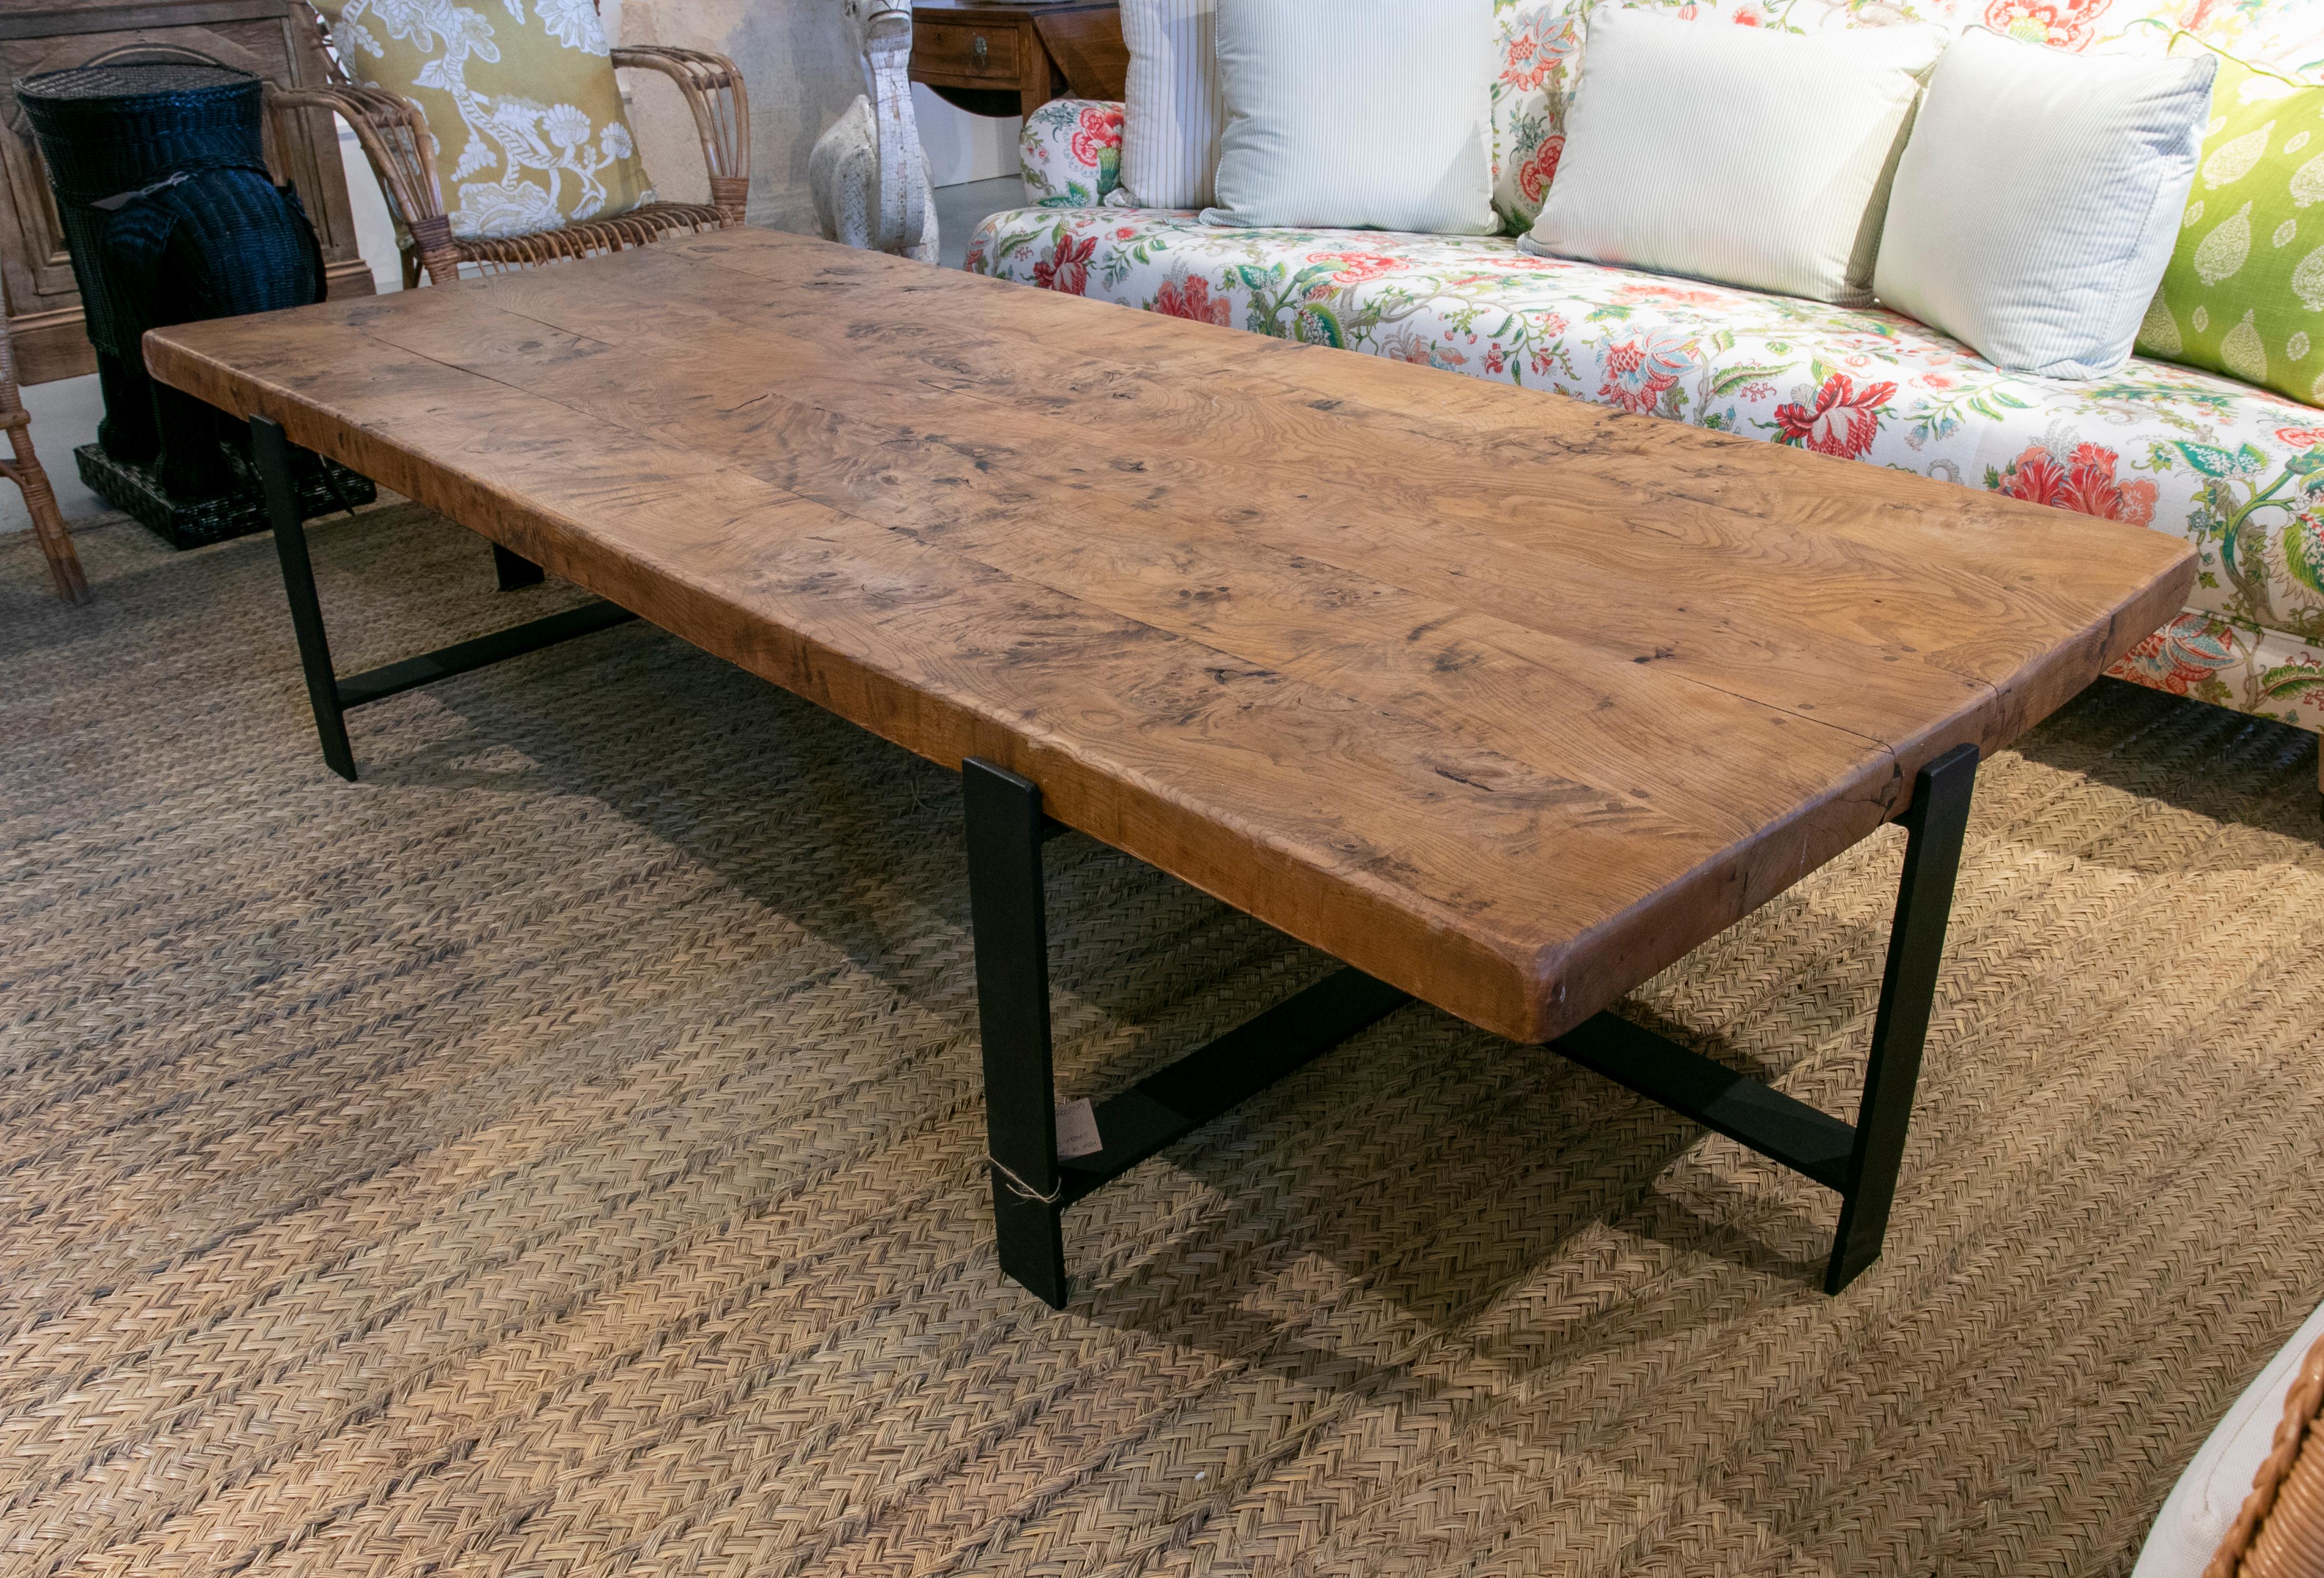 Spanish 1950s Coffee Table with Wooden Table Top and Modern Iron Base